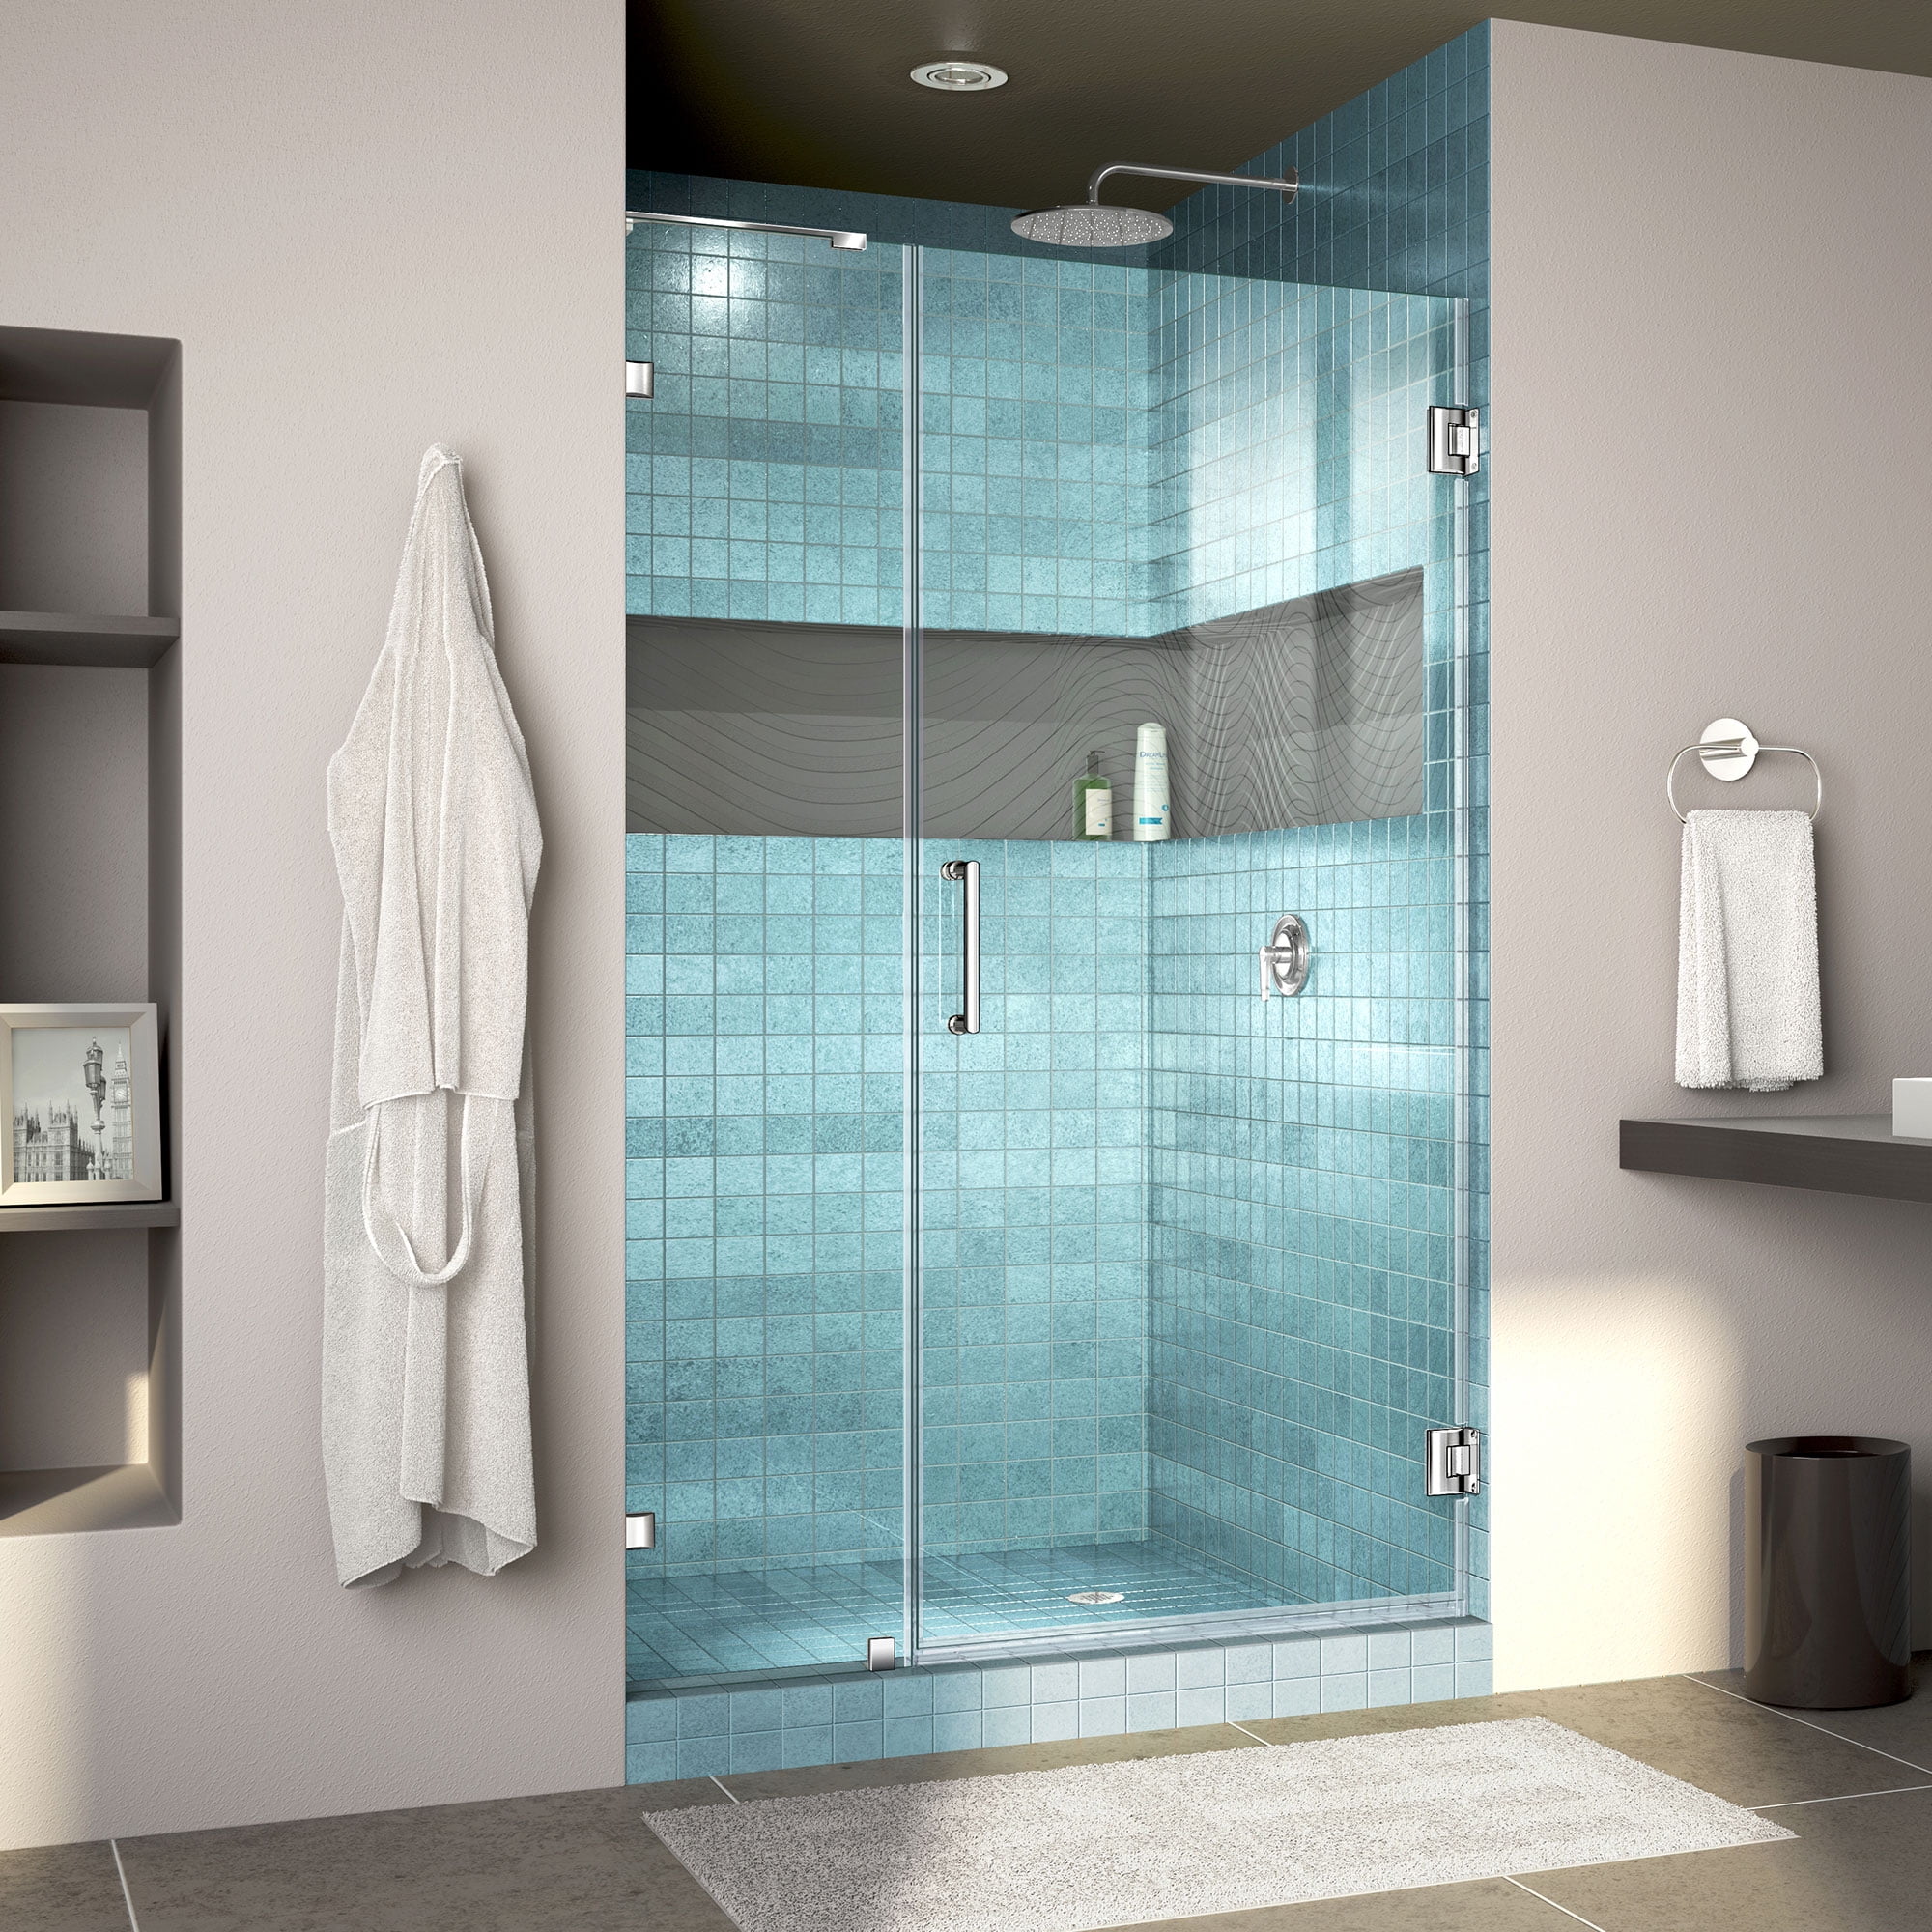 DreamLine Unidoor Lux 44 in. W x 72 in. H Fully Frameless Hinged Shower Door with L-Bar in Chrome